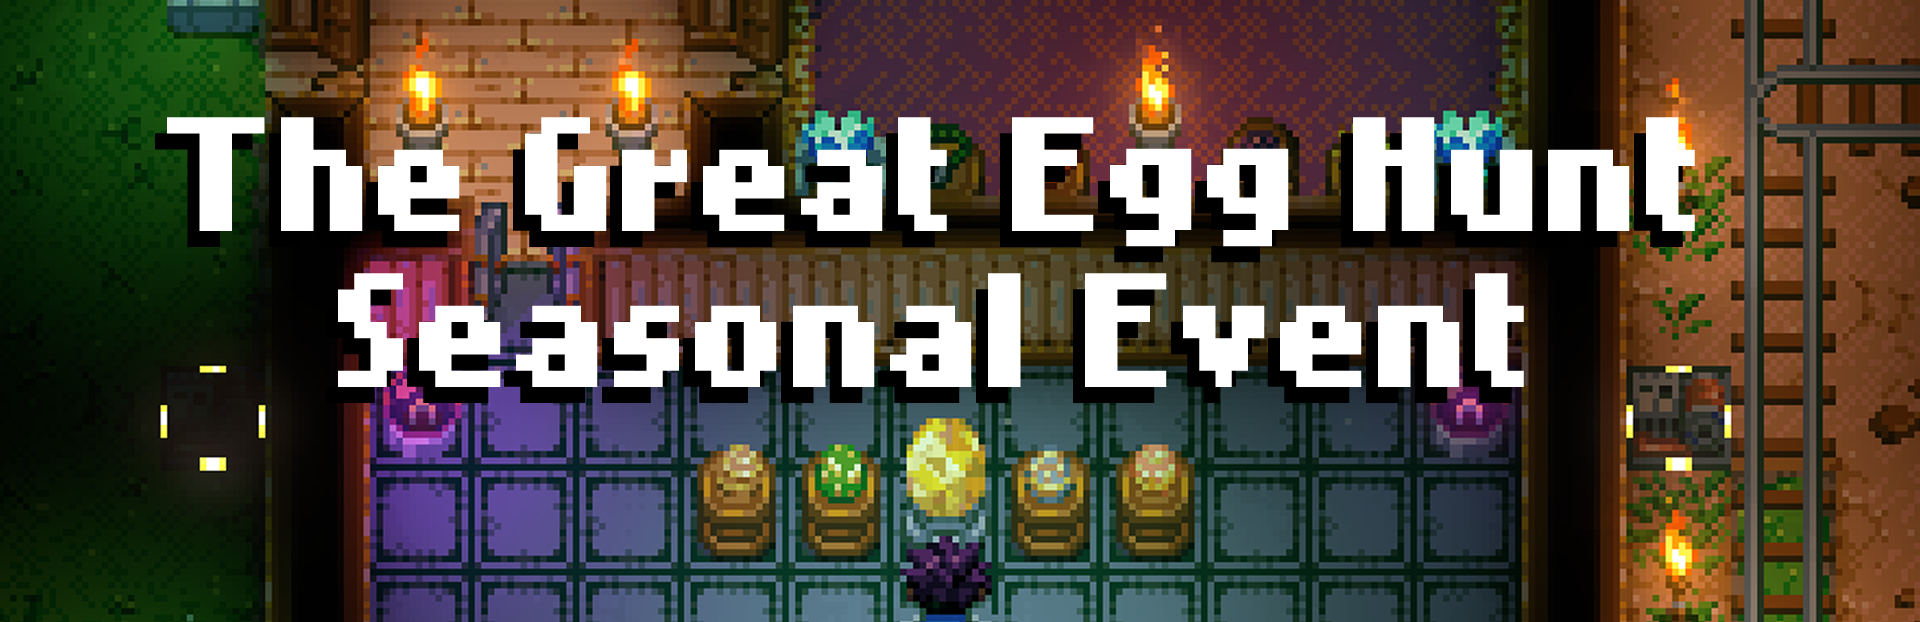 The Great Egg Hunt event.png